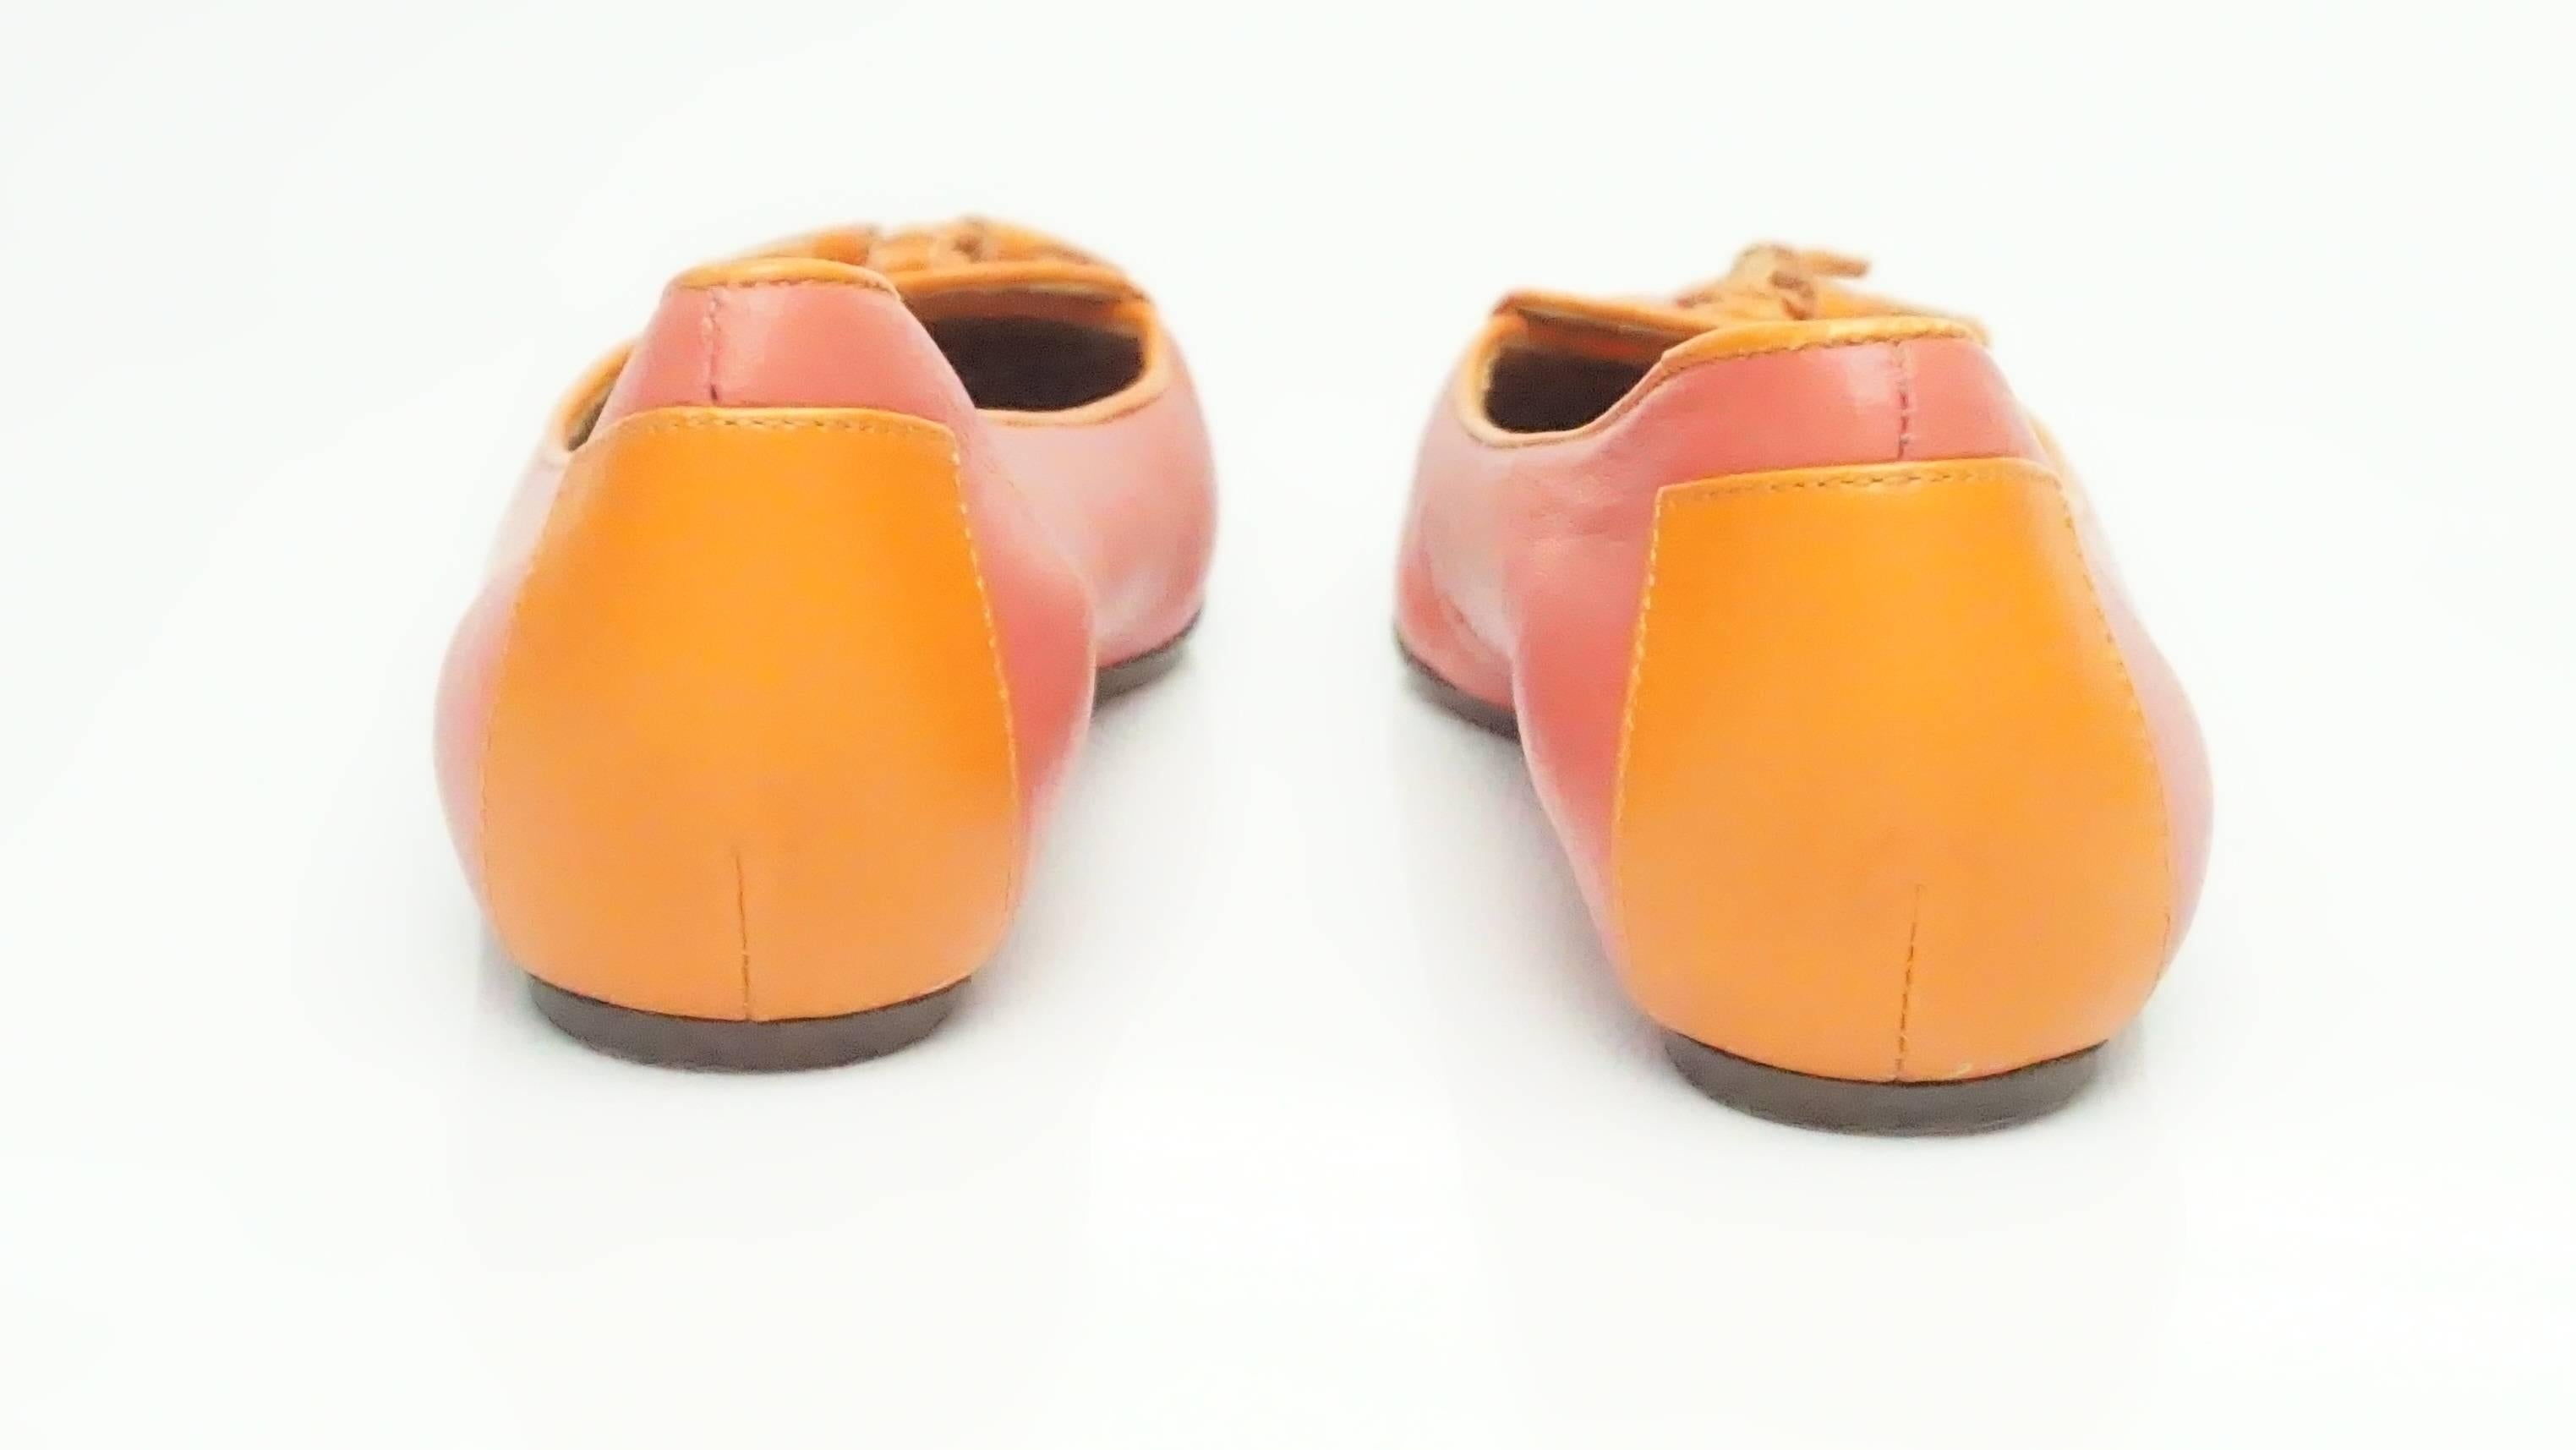 coral loafers